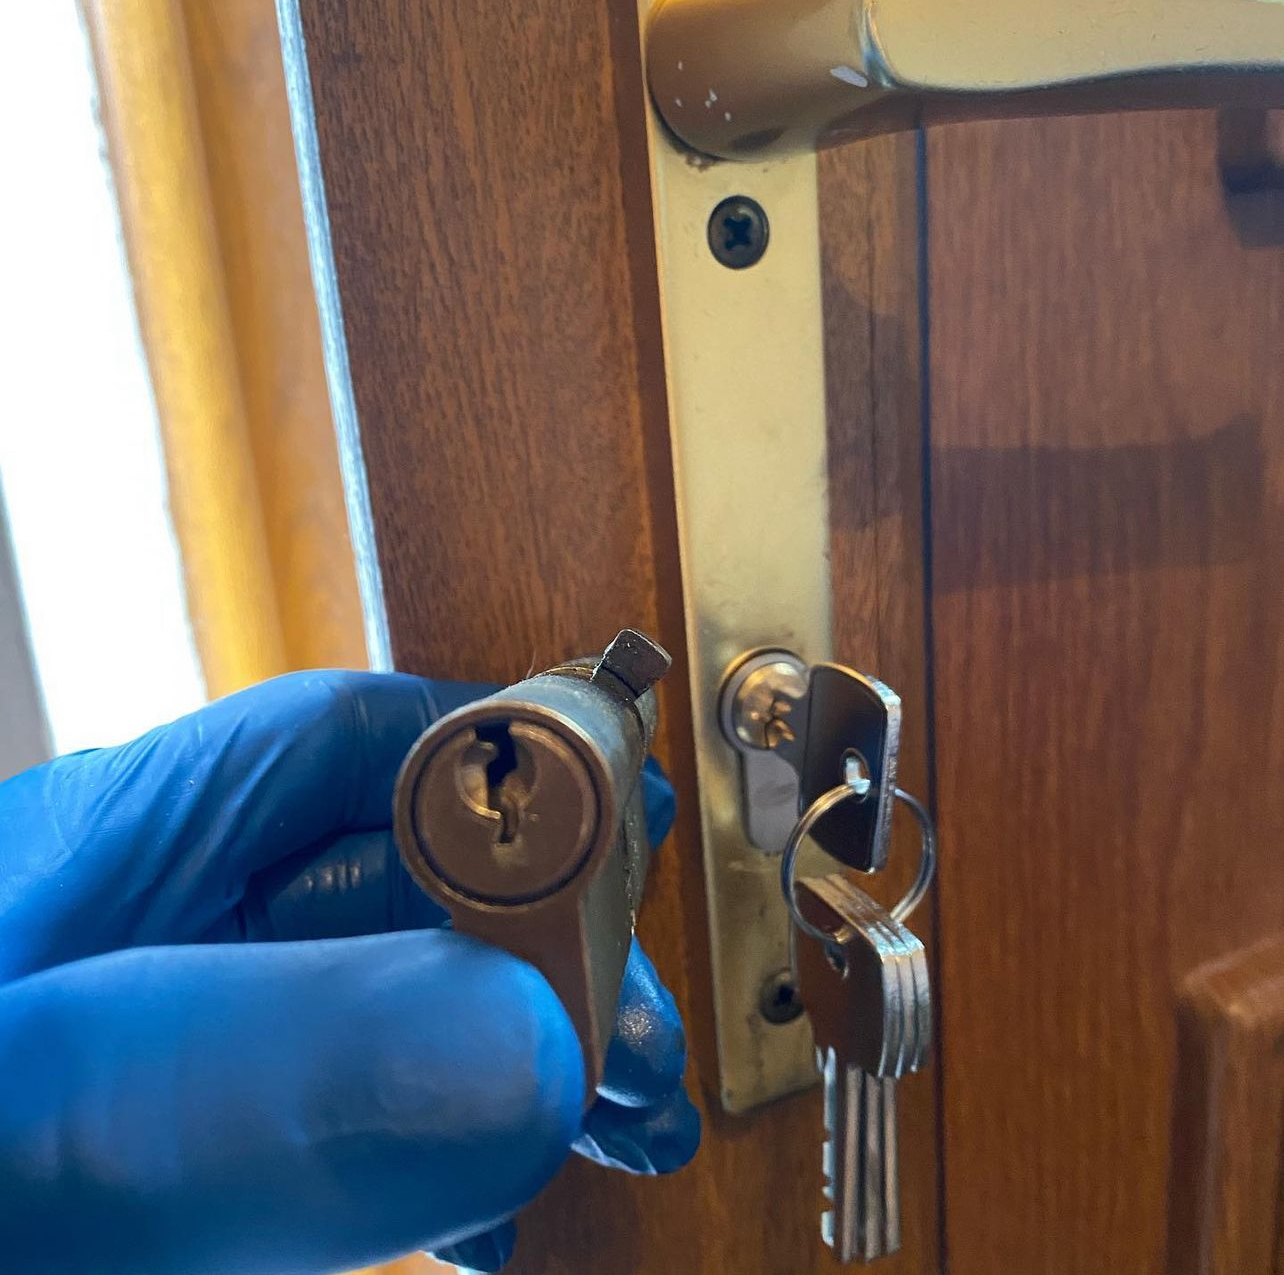 lock replacement by a redhill locksmith ltd engineer.